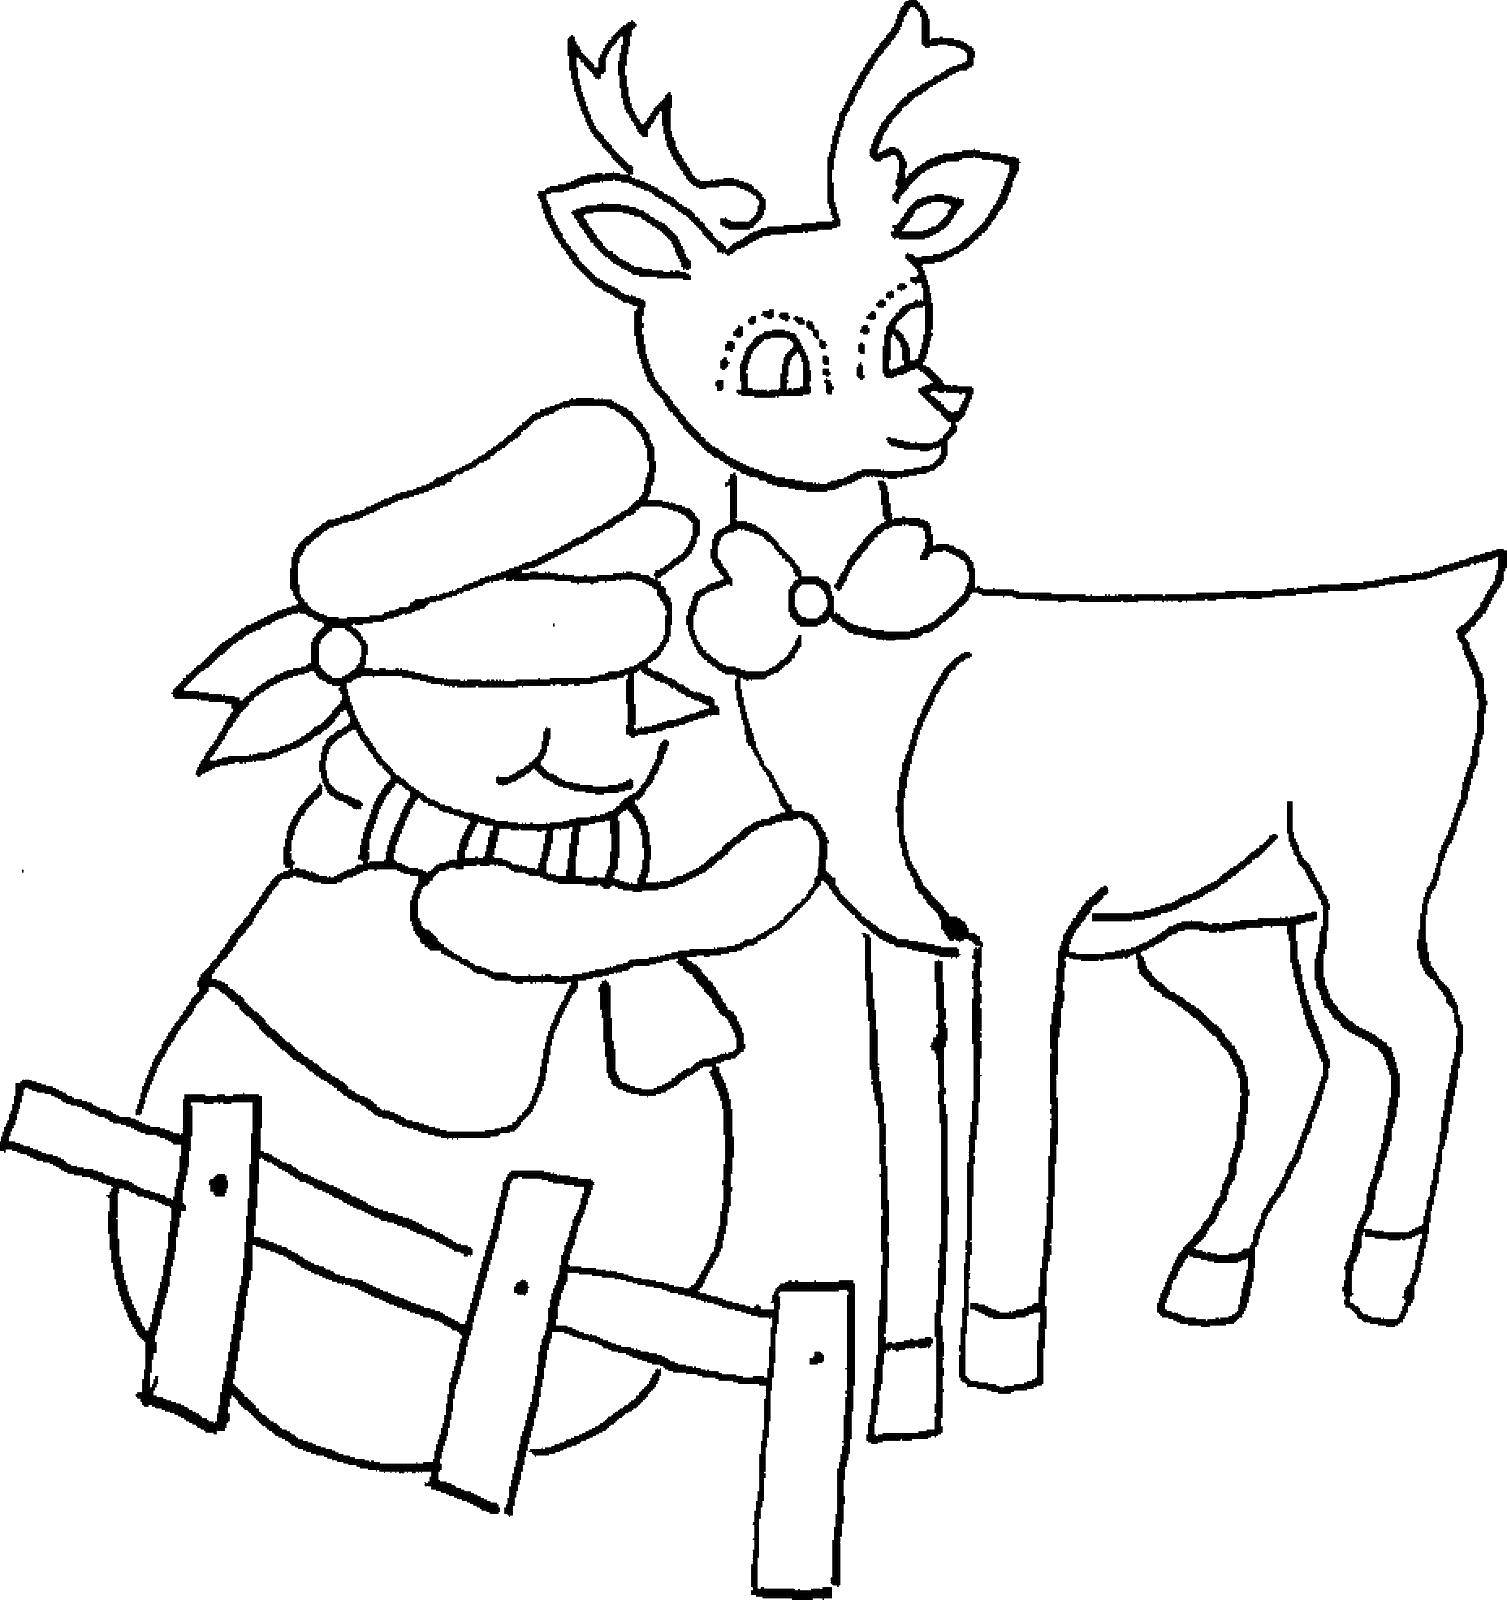 Coloring Deer and snowman. Category Christmas. Tags:  Christmas, snowman.